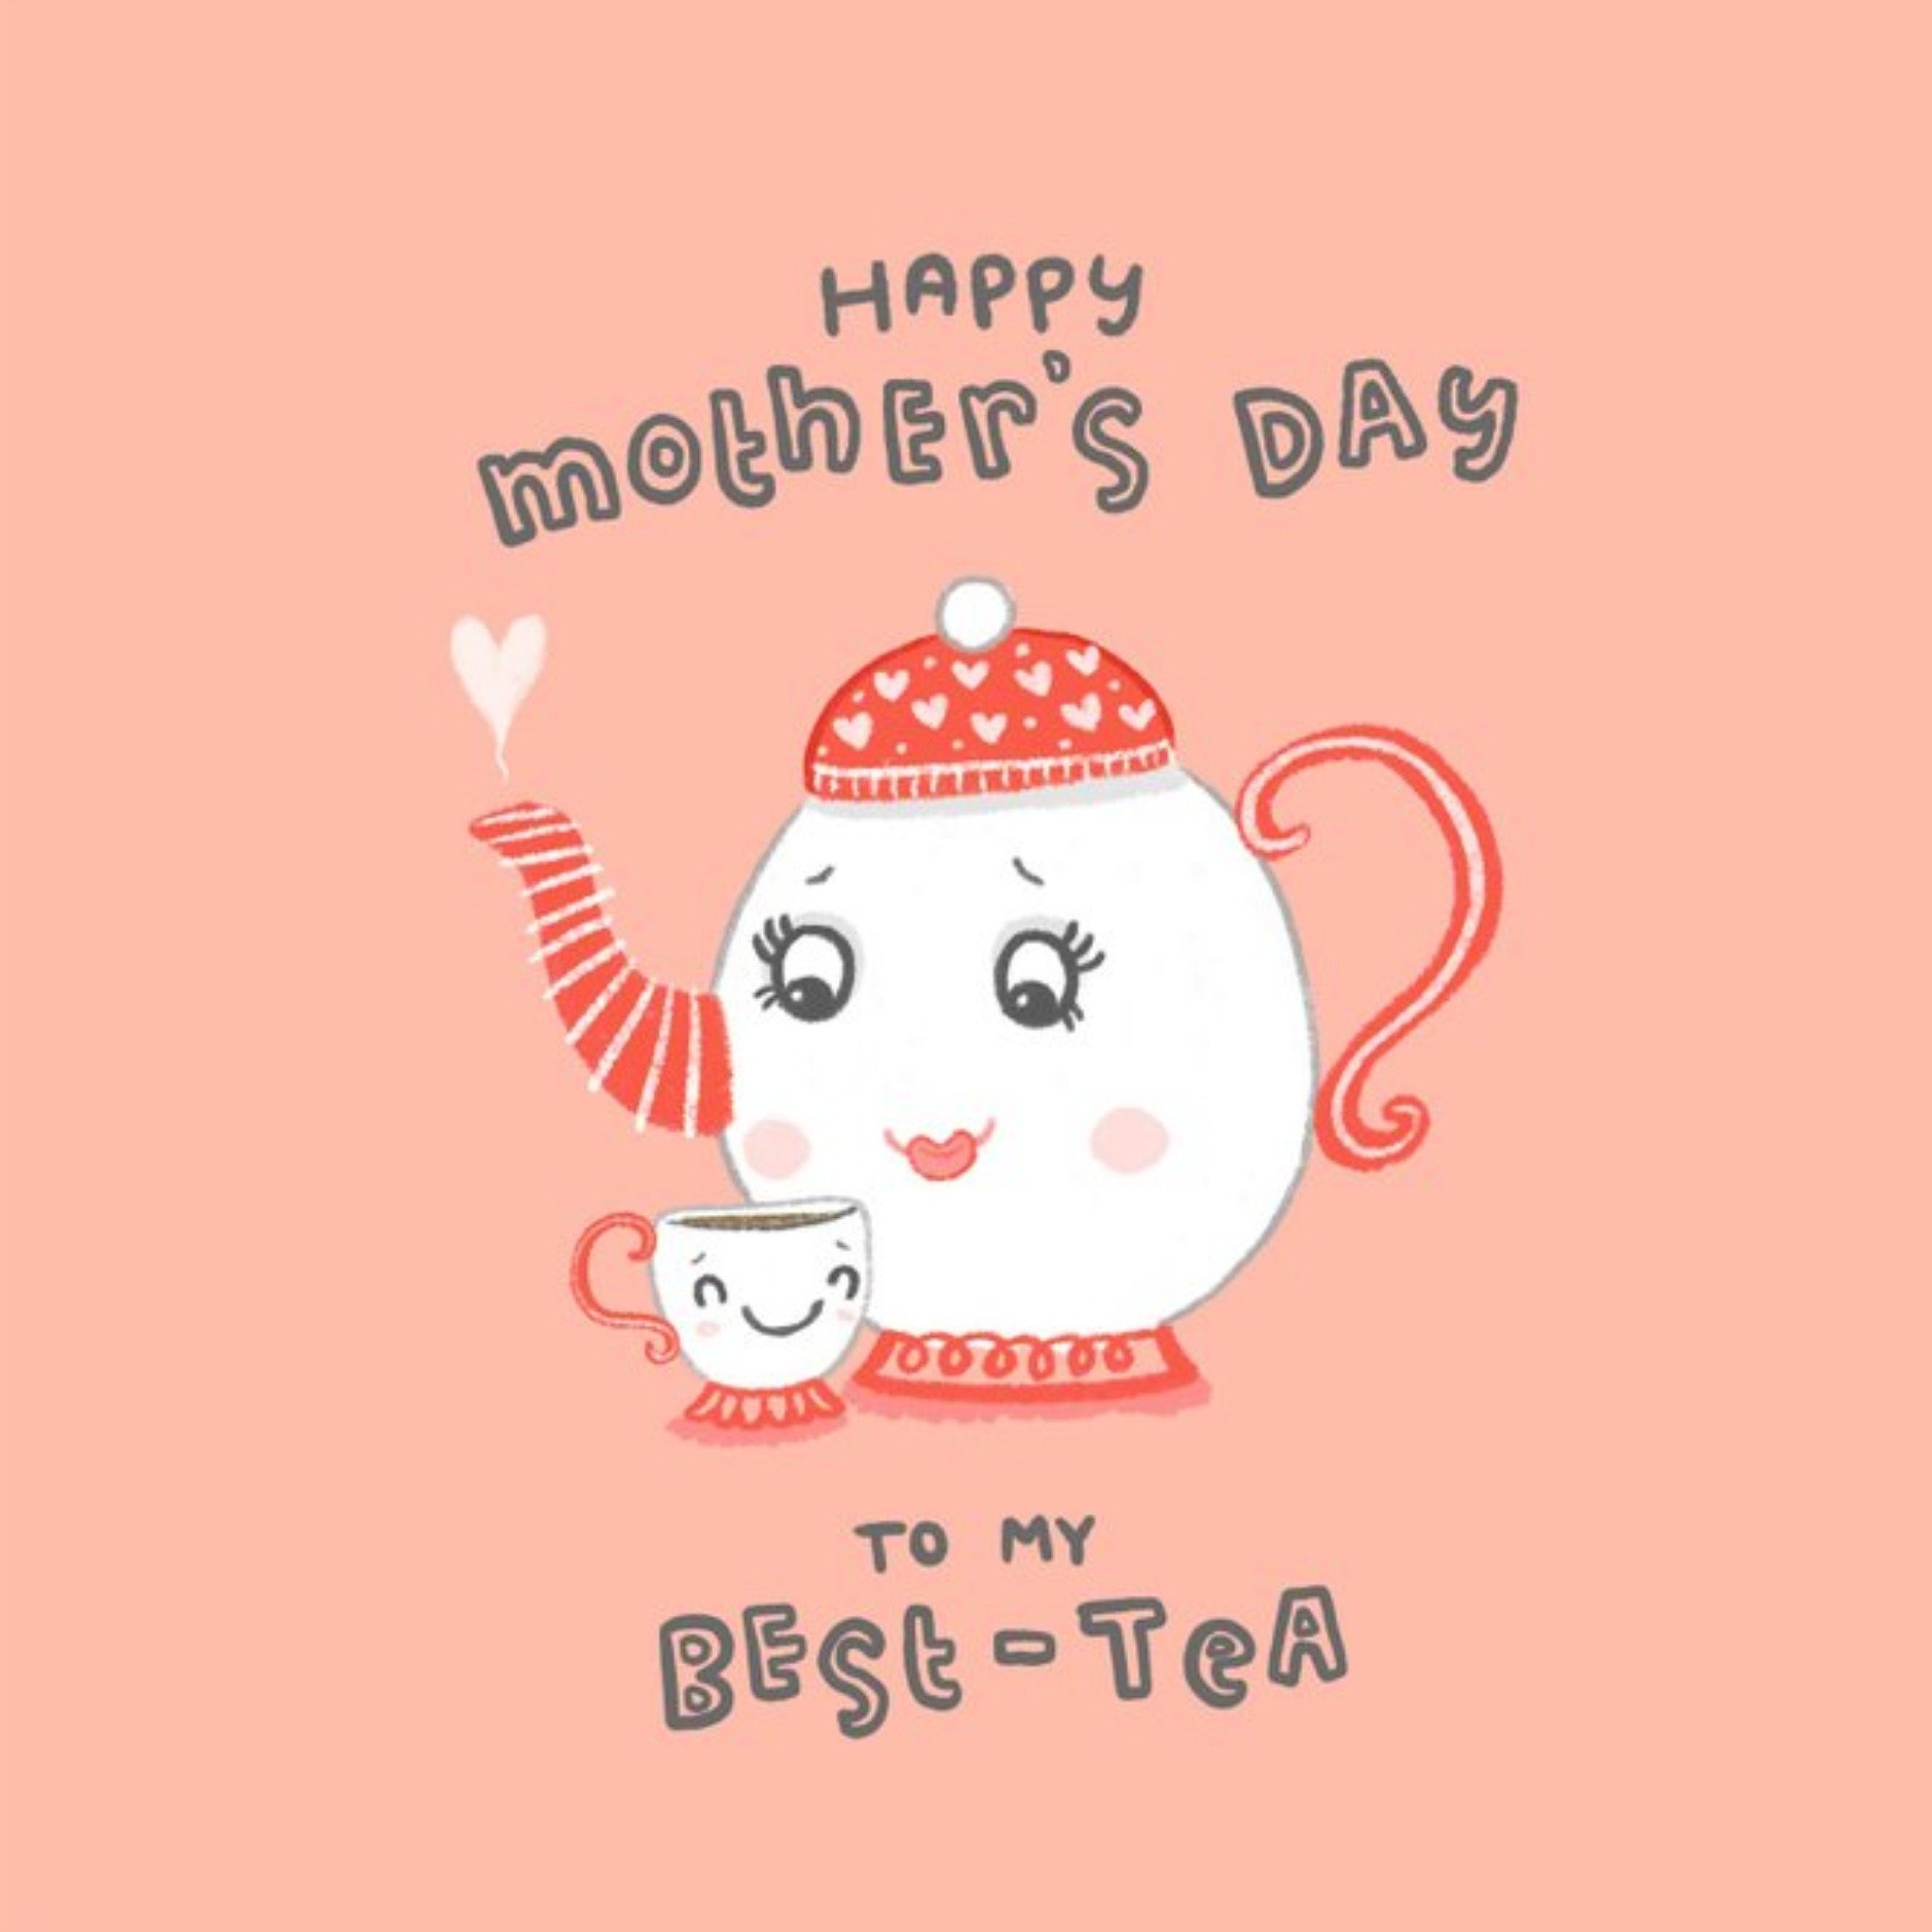 Love Hearts Blue Kiwi Illustration Funny Teapot Mother's Day Birthday Card, Square